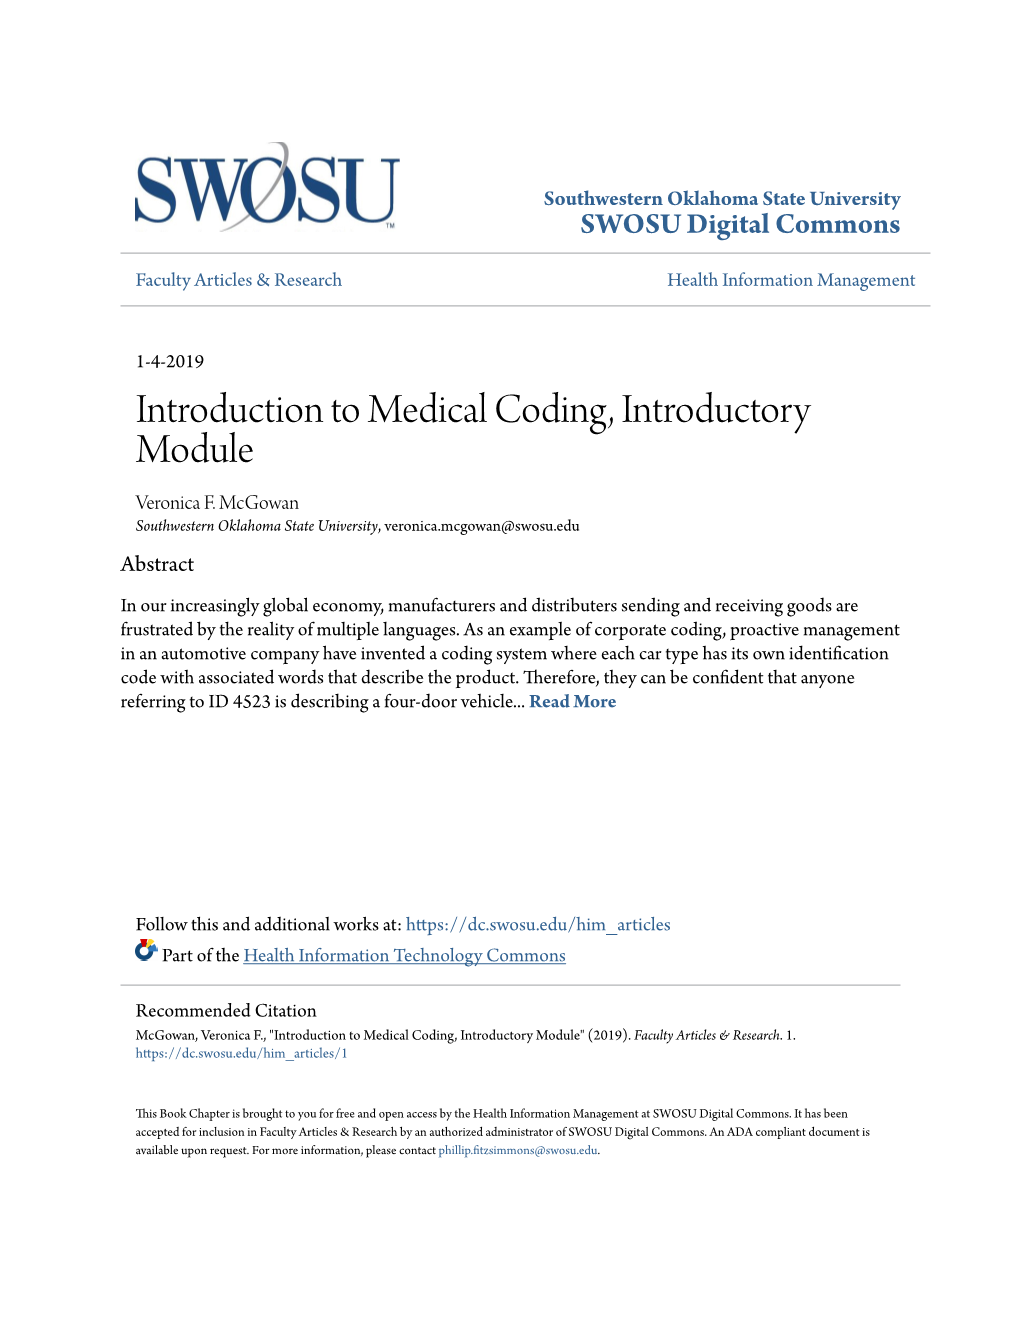 Introduction to Medical Coding, Introductory Module Veronica F